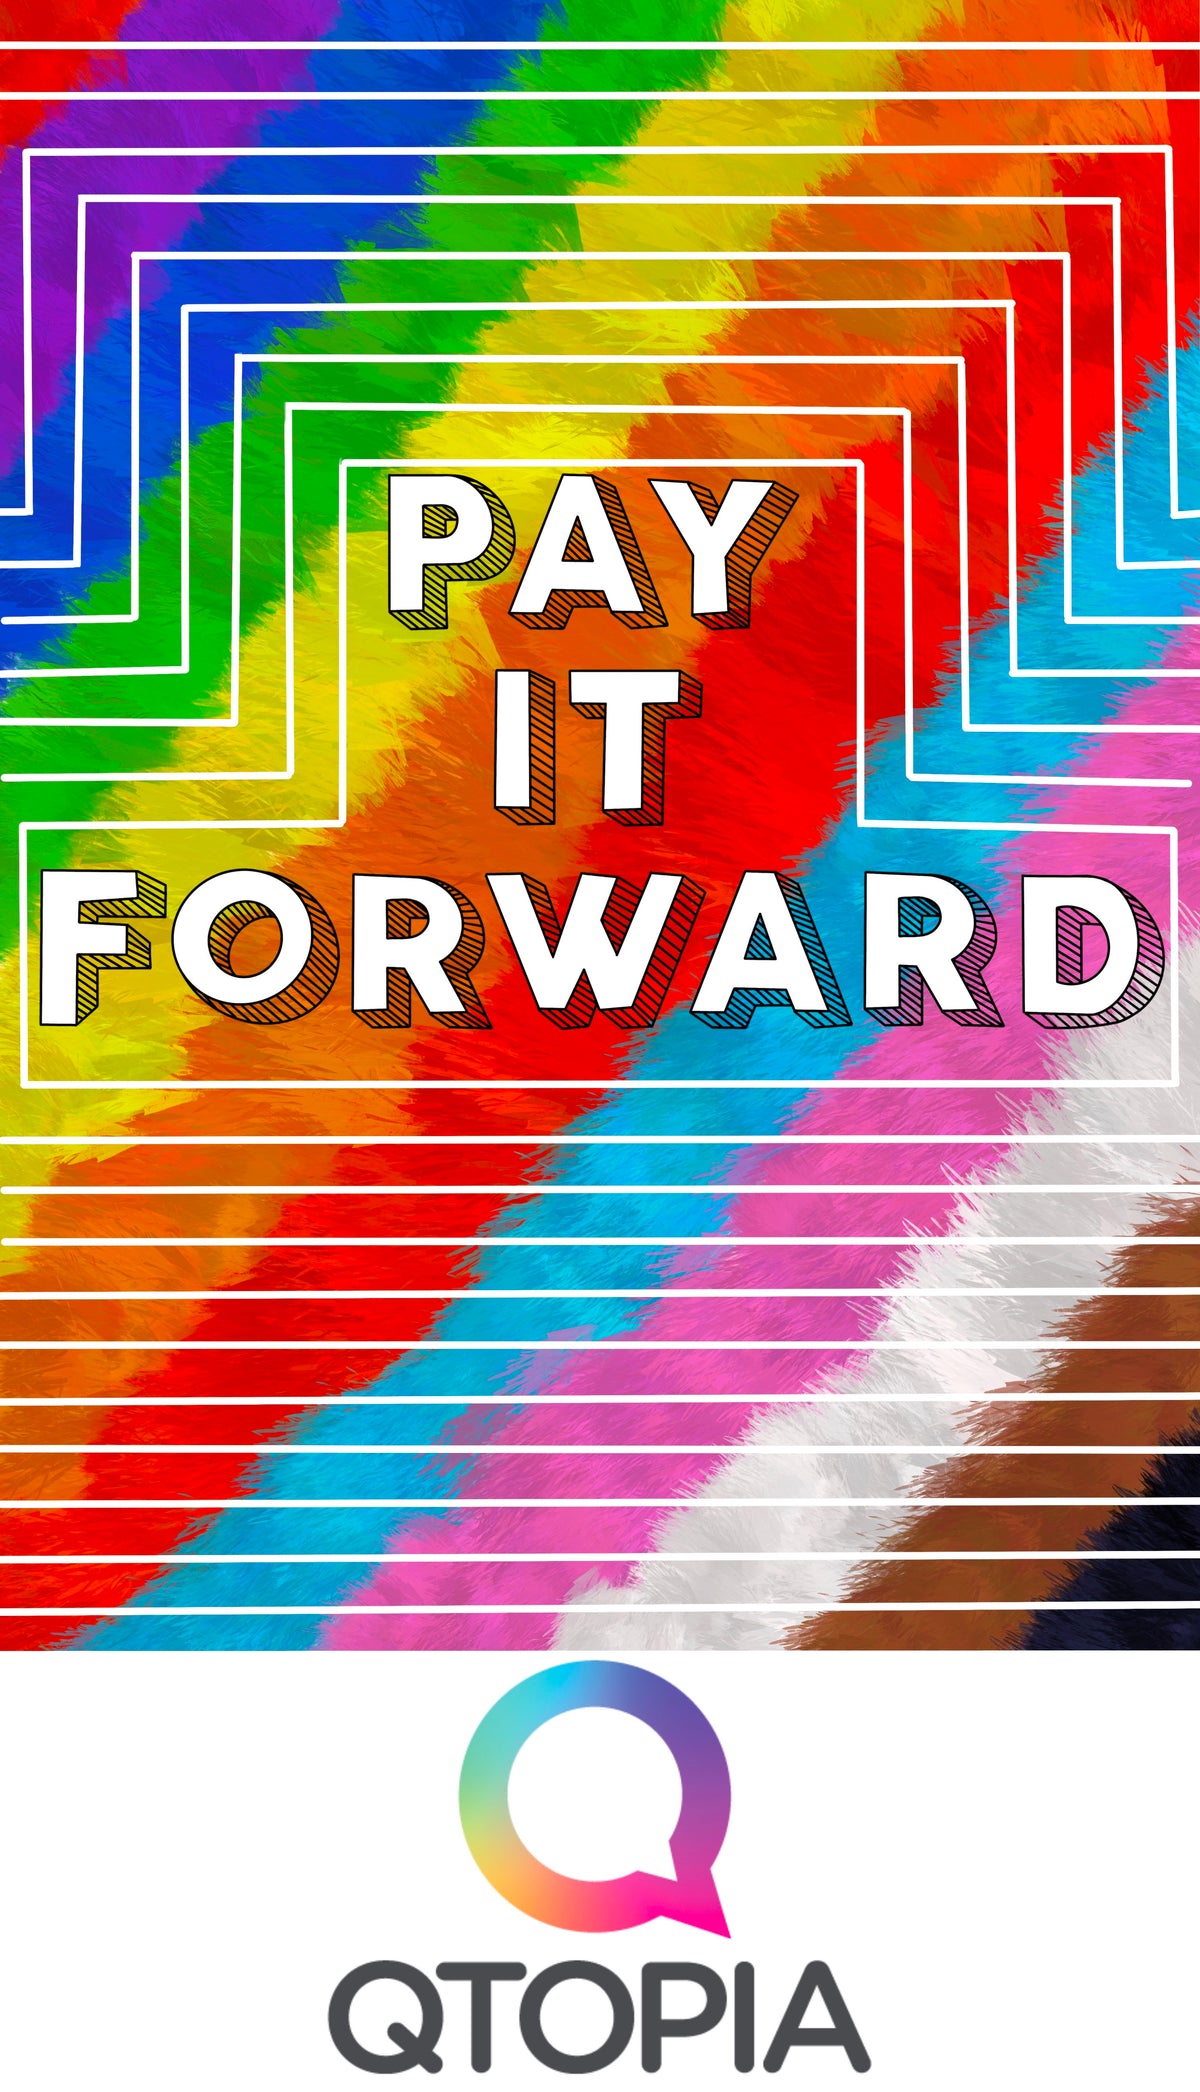 Pay It Forward Book Donation